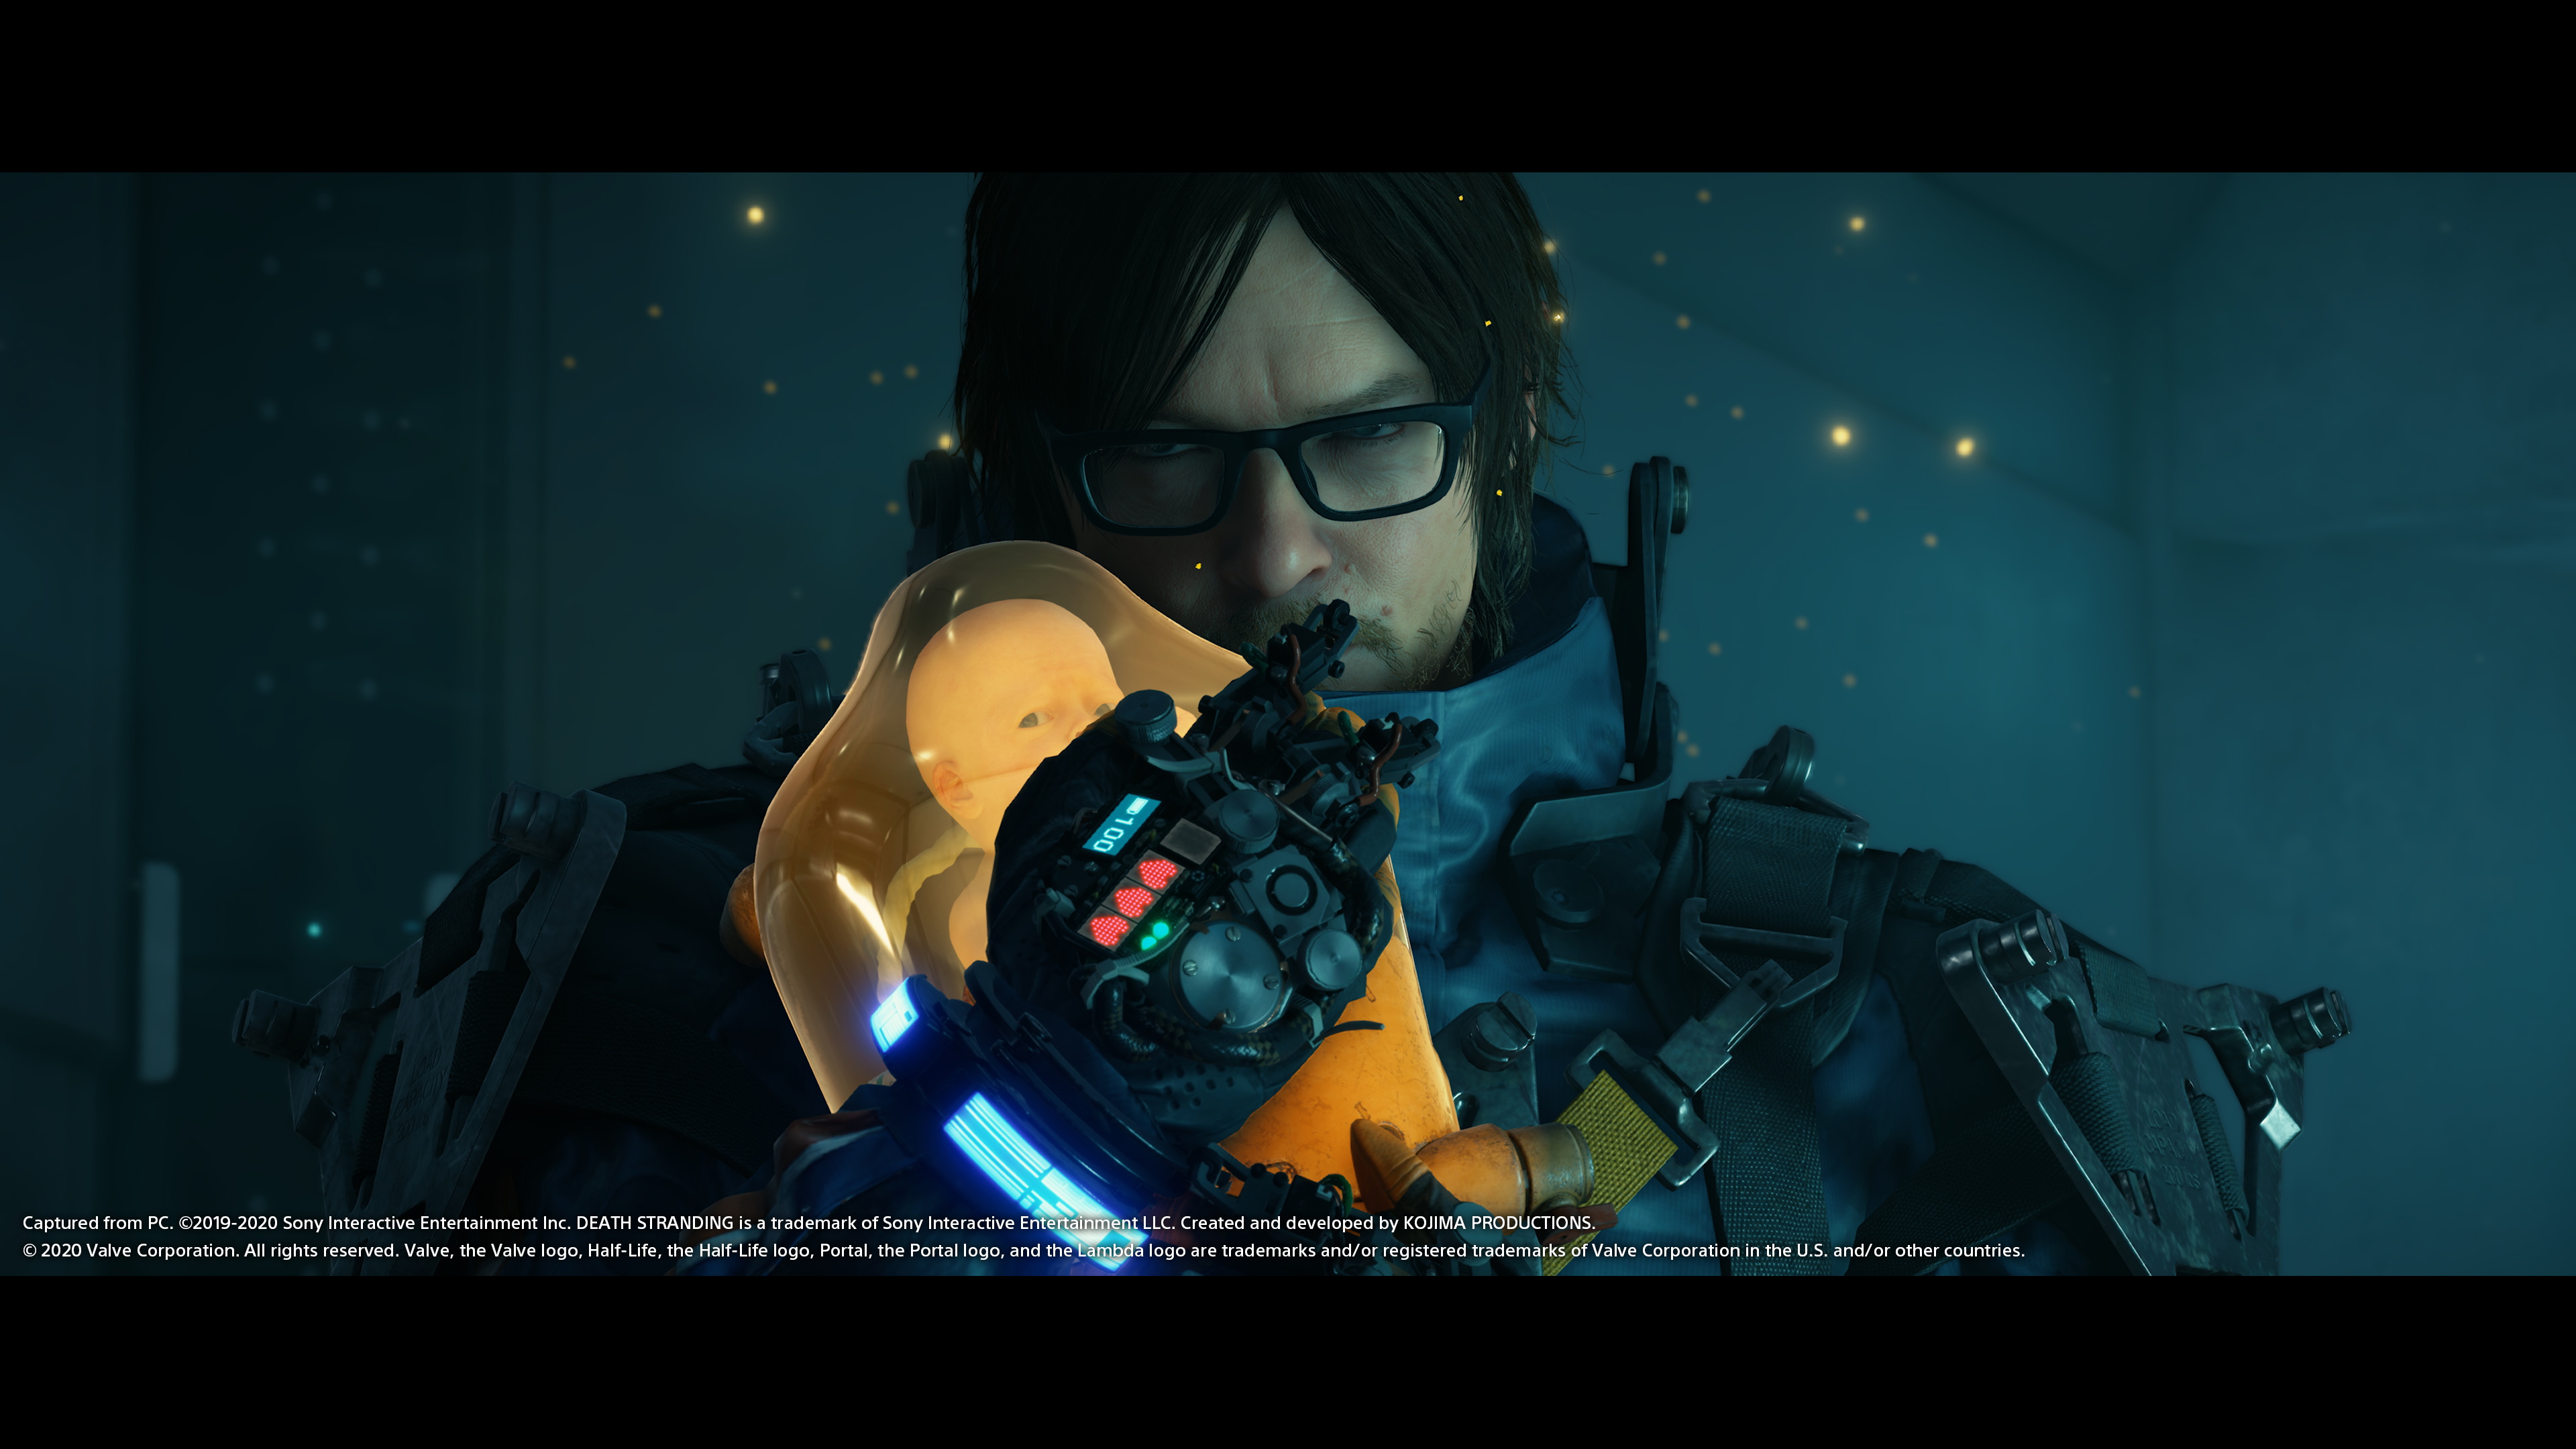 A screenshot from Death Stranding on PC